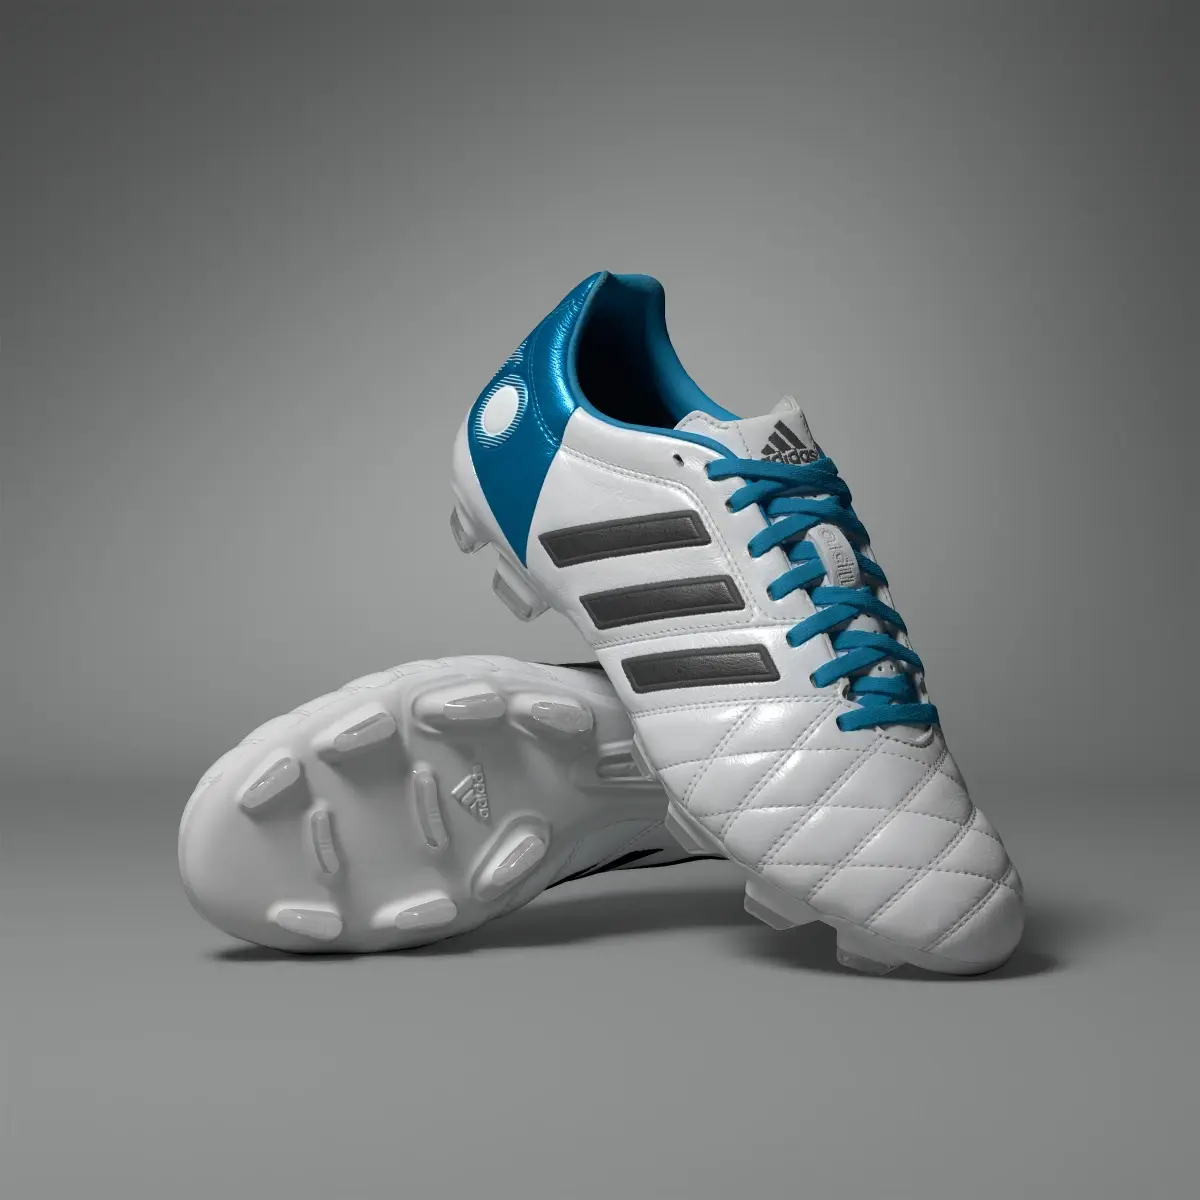 Adidas 11Pro Toni Kroos Firm Ground Soccer Cleats. 1